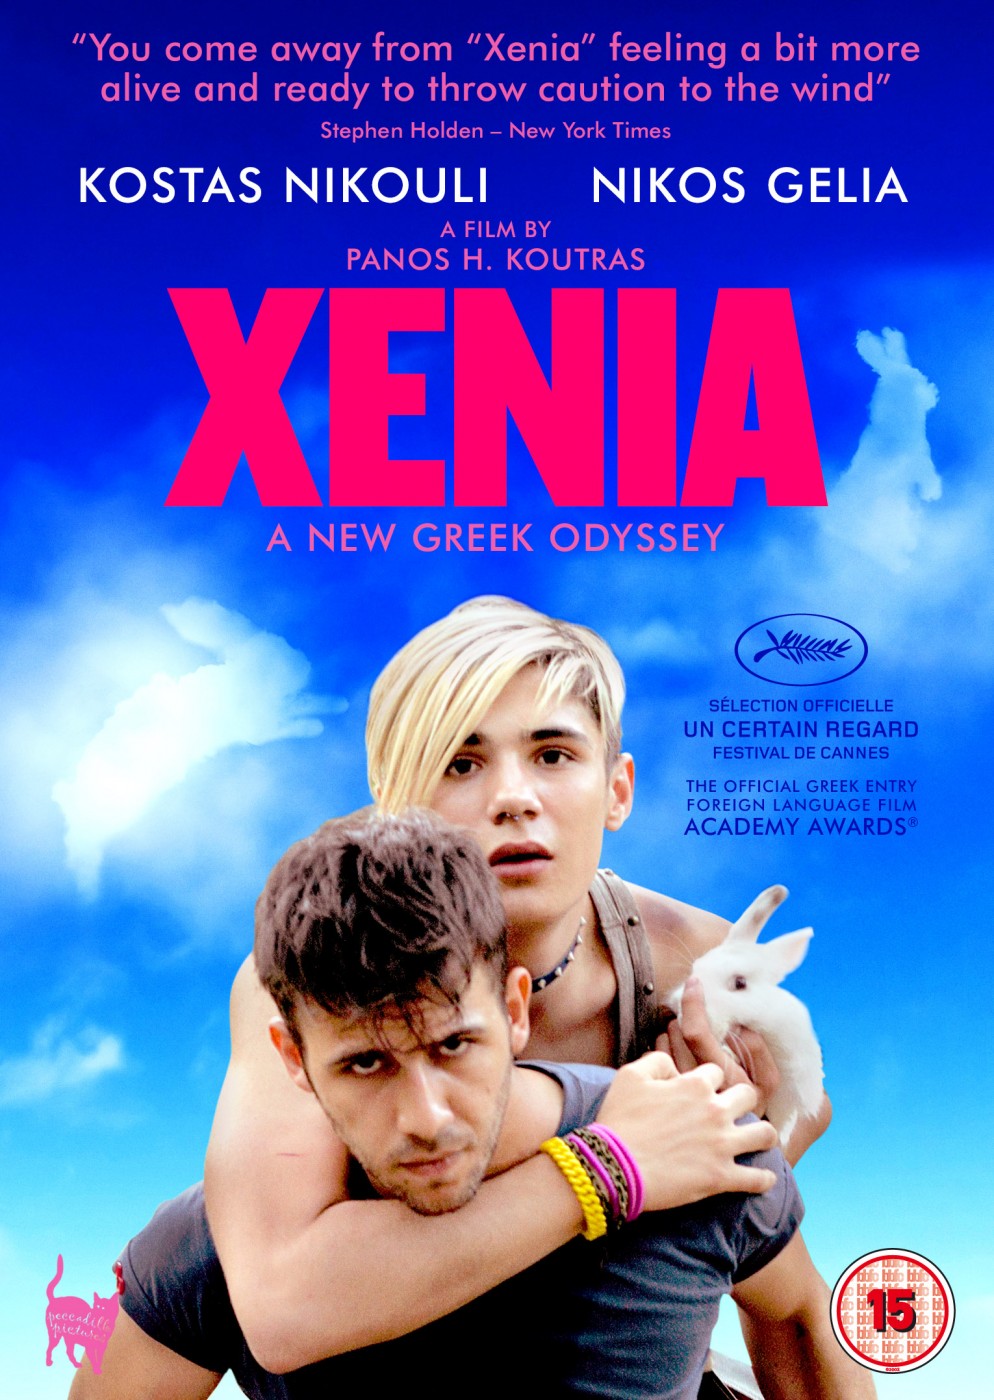 Xenia is a new Greek odyssey from director Panos H. Koutras.